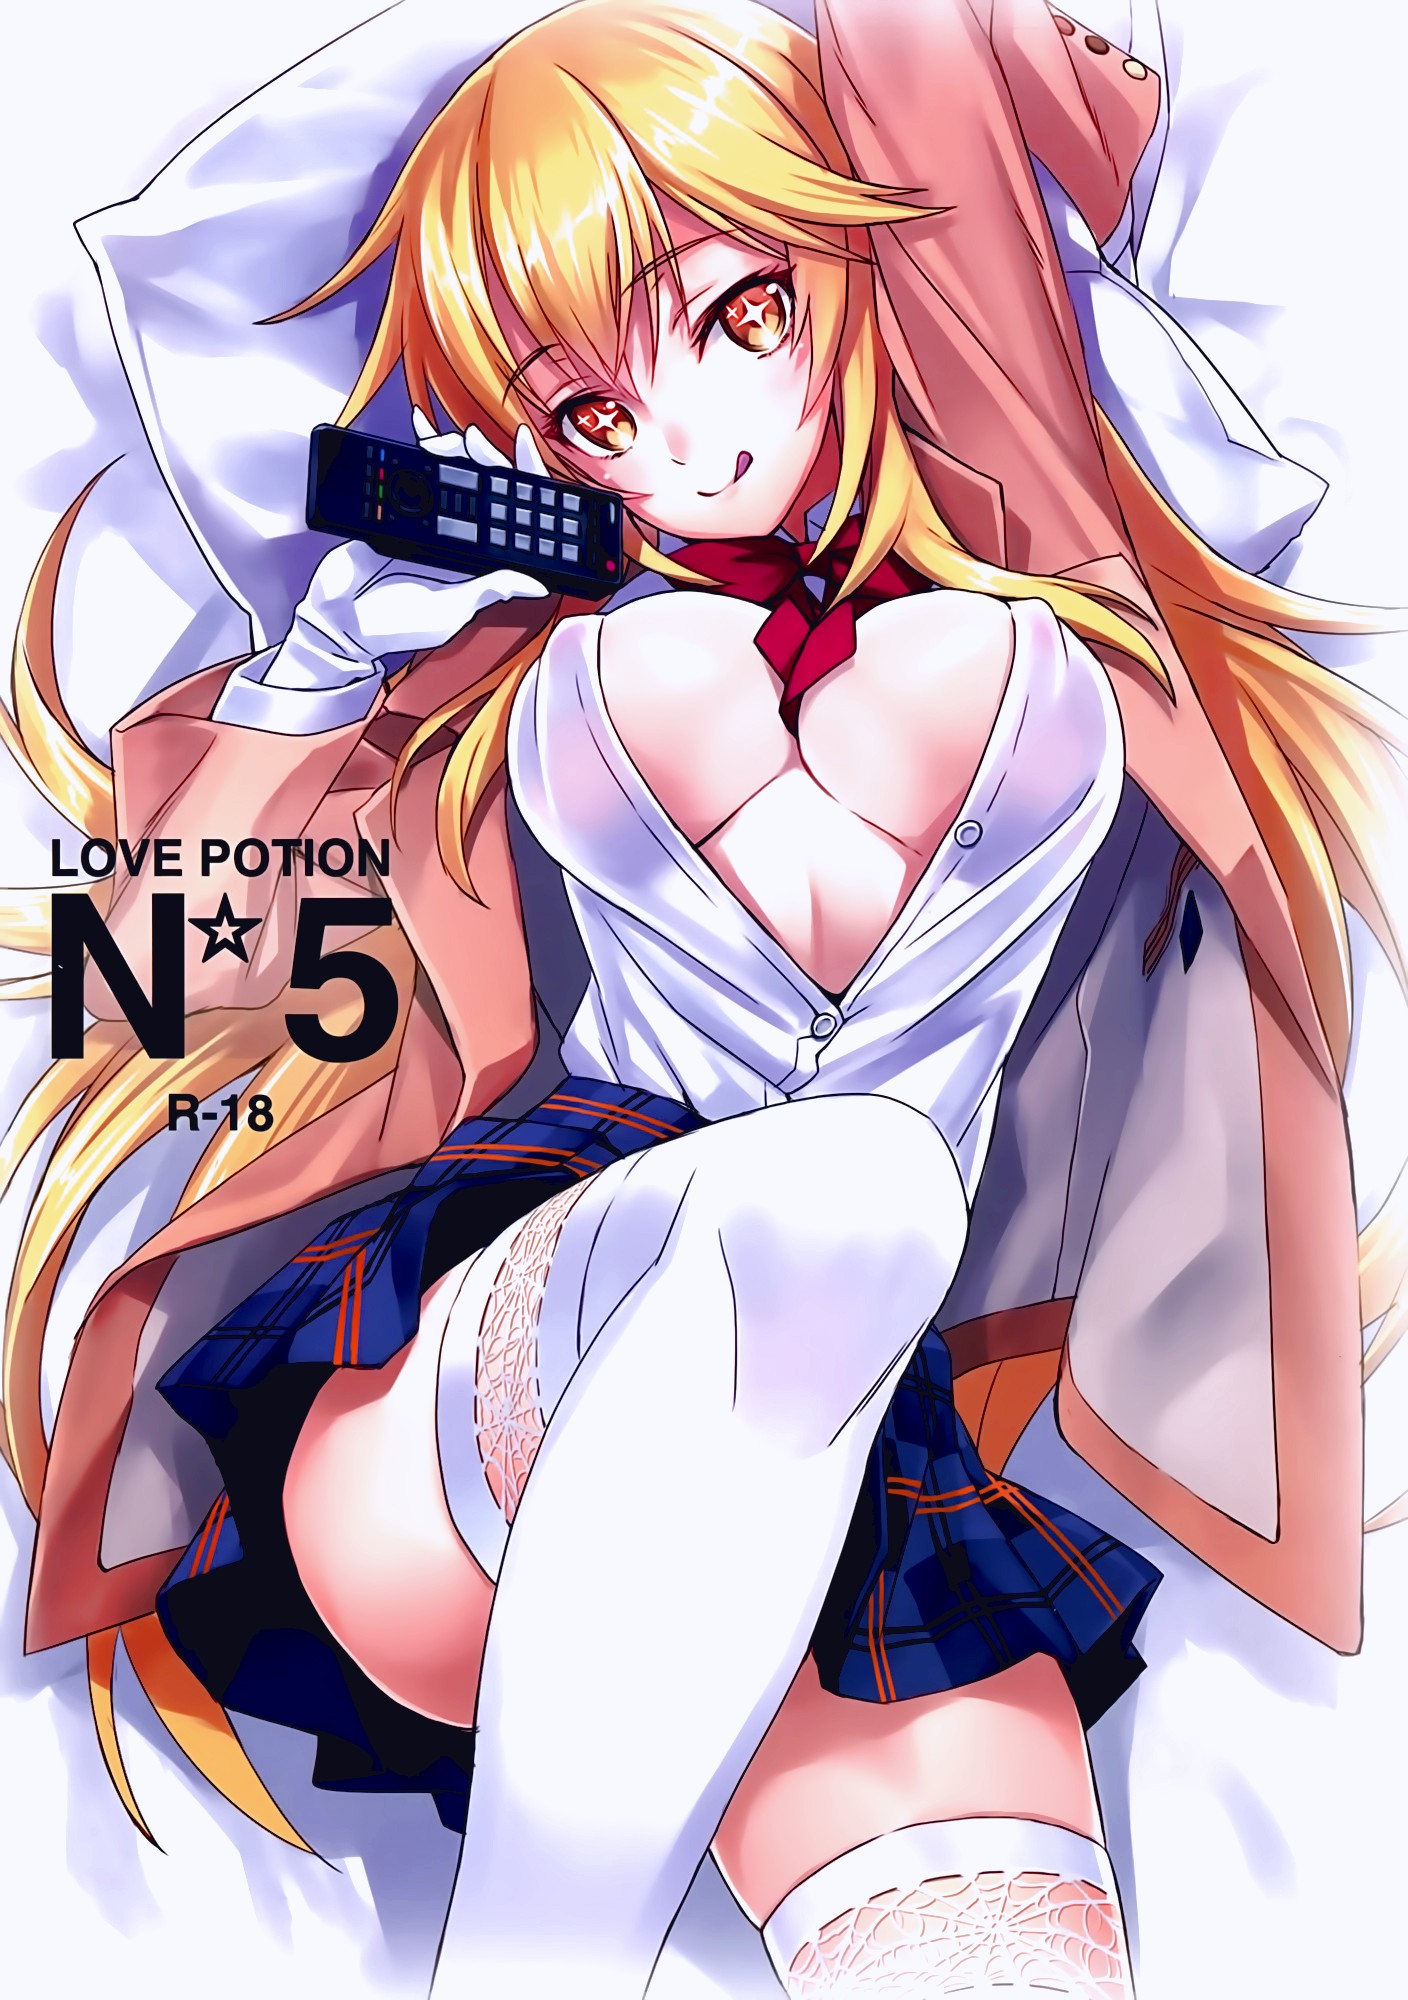 Love Potion No.5☆ hentai manga page 01 on category A Certain Magical Index